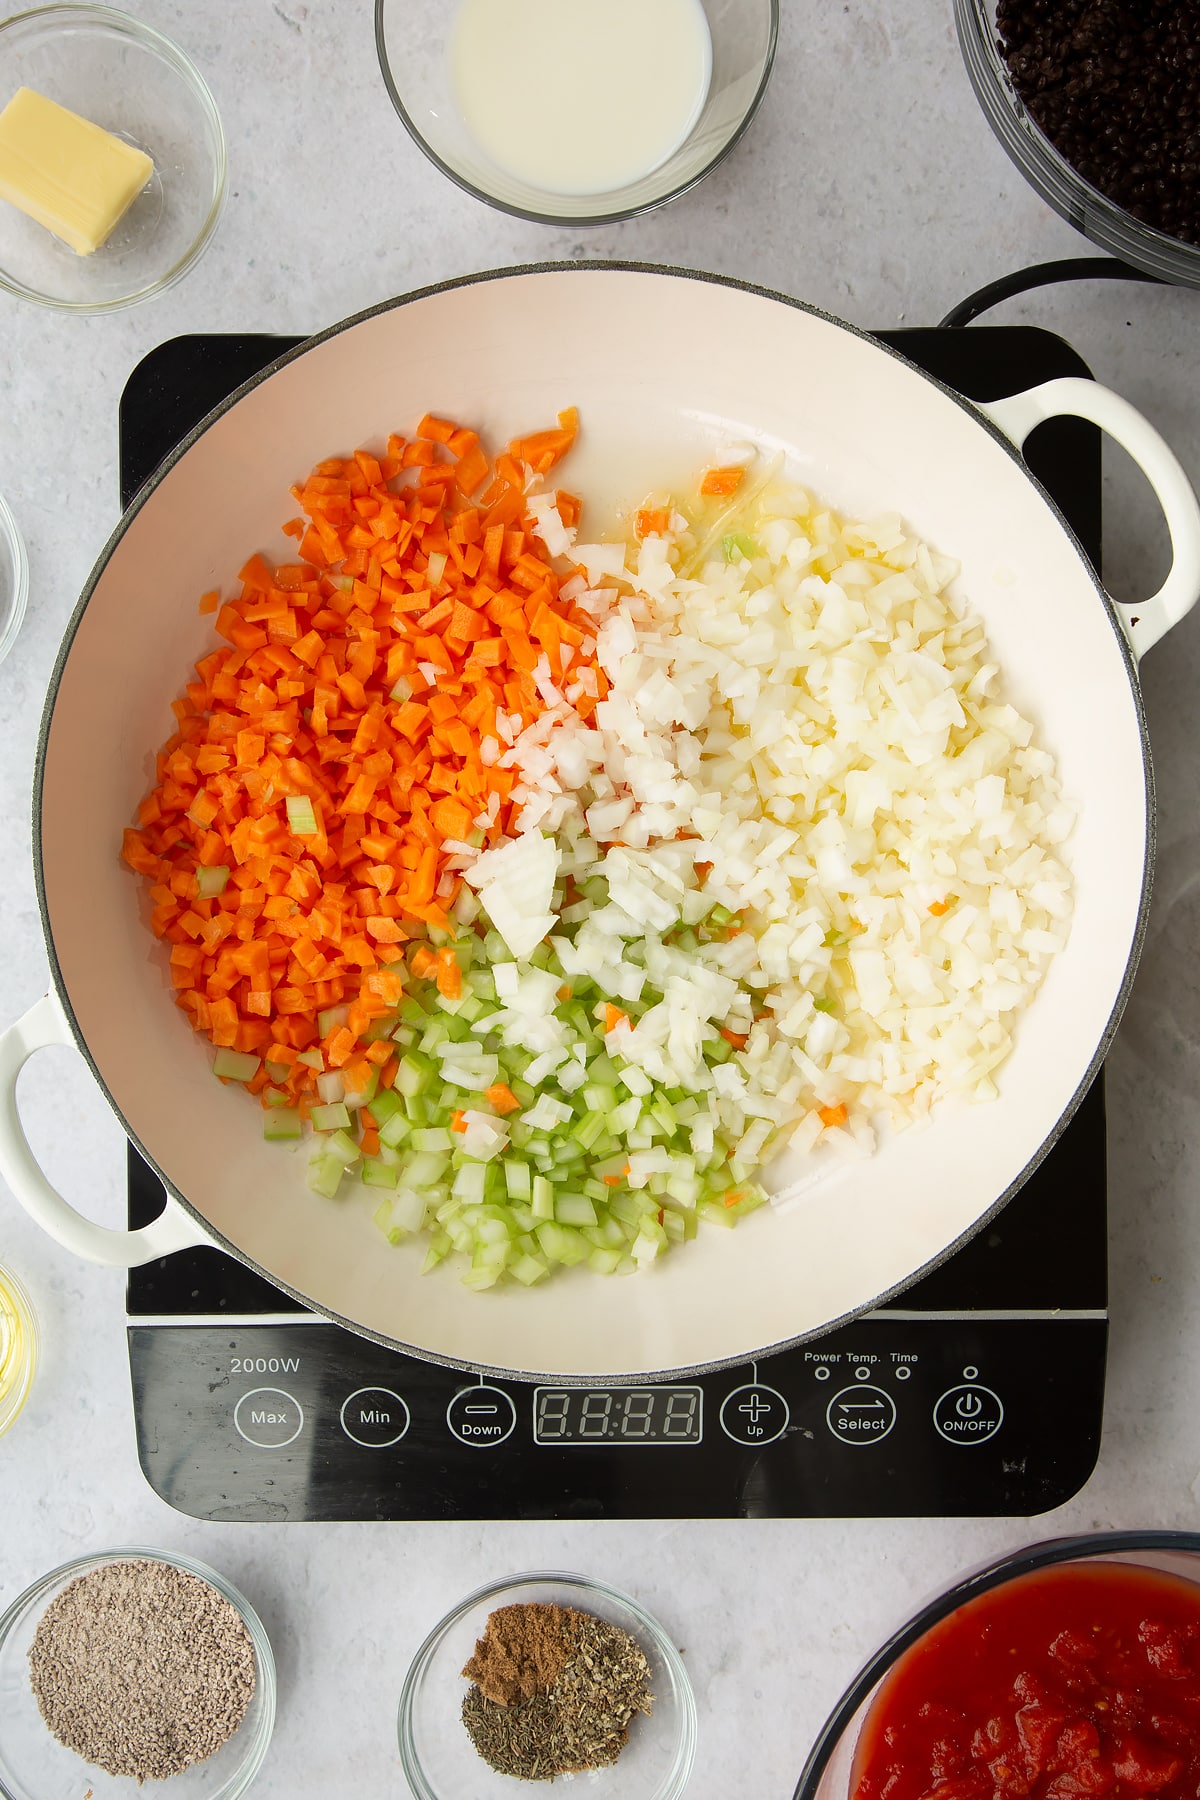 a large frying pan on an induction hob with chopped onion, celery, carrot, garlic.